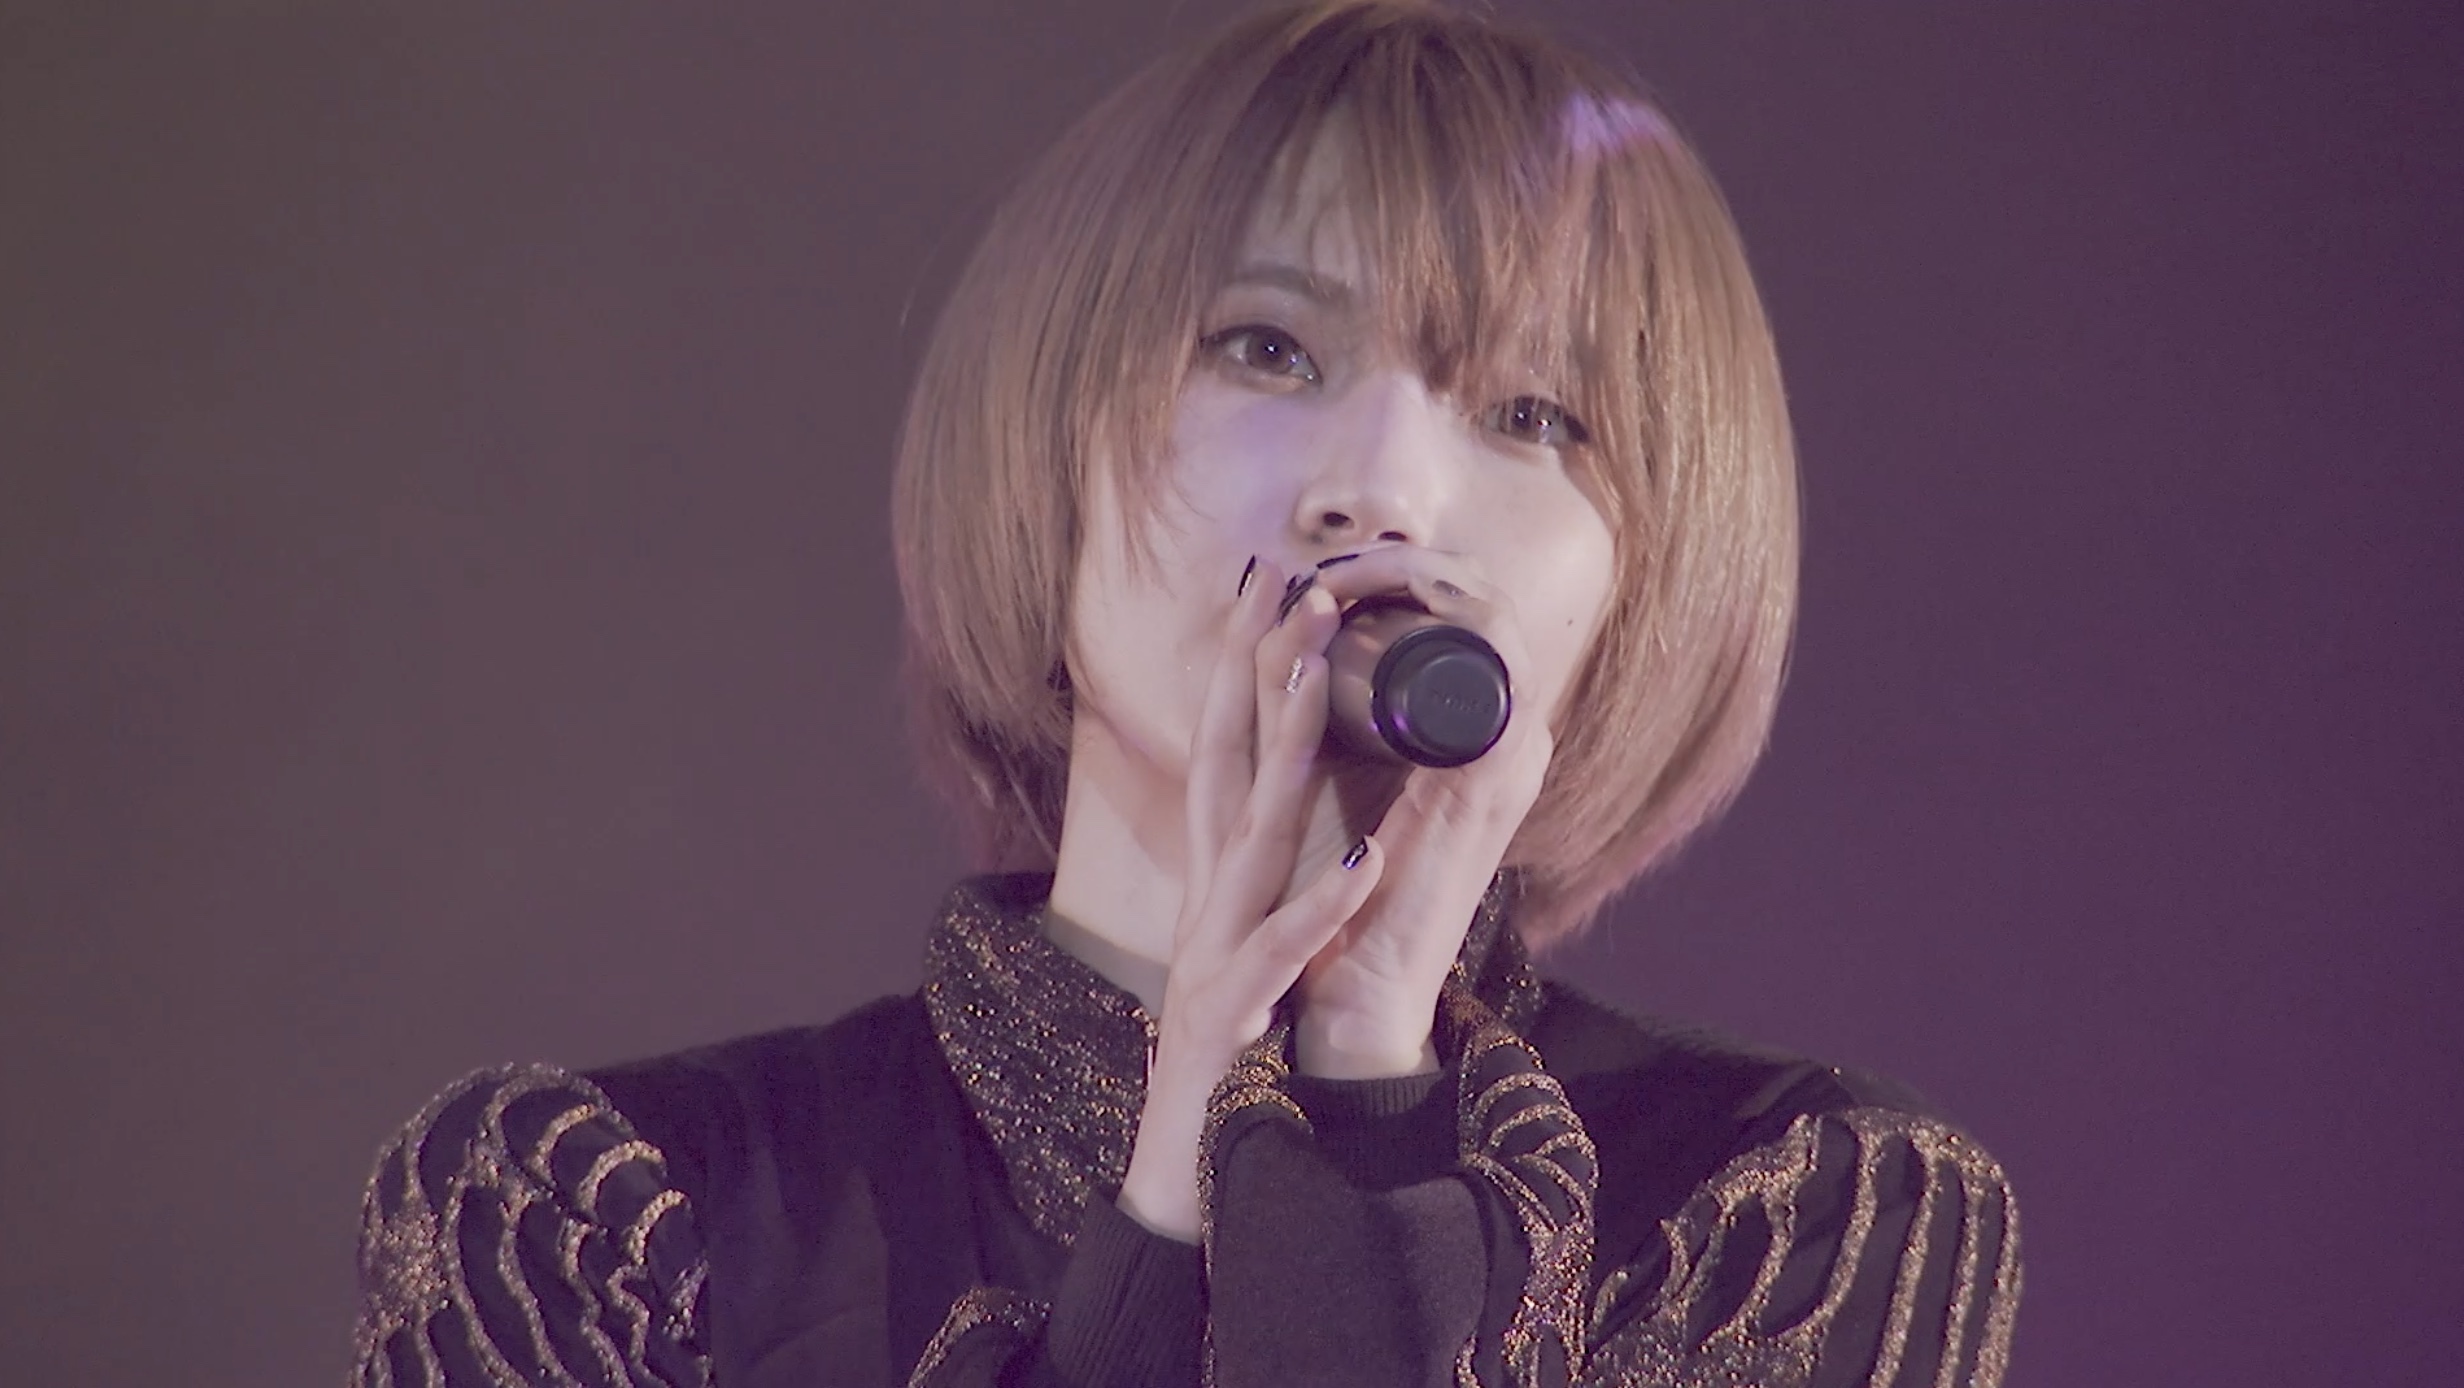 『EMPiRE BREAKS THROUGH the LiMiT LiVE』より